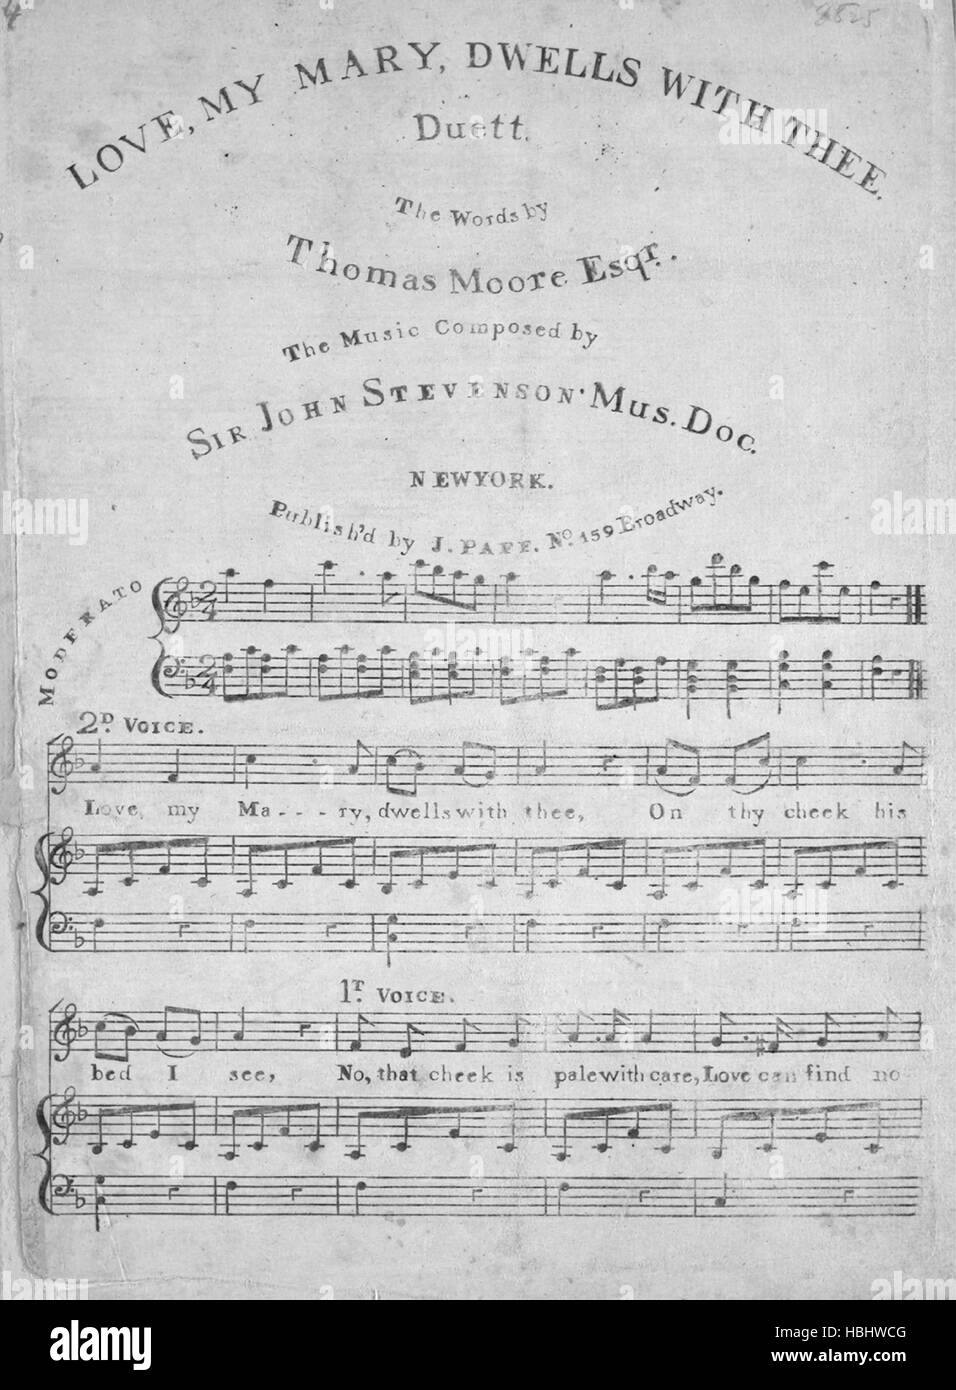 Sheet music cover image of the song 'Love, My Mary, Dwells With Thee A Duett', with original authorship notes reading 'The Words by Thomas Moore, Esqr The Music Composed by Sir John Stevenson, Mus Doc', United States, 1900. The publisher is listed as 'J. Paff, No. 159 Broadway', the form of composition is 'strophic with chorus', the instrumentation is 'piano and voice', the first line reads 'Love my Mary, dwells with thee, on thy cheek his bed I see', and the illustration artist is listed as 'None'. Stock Photo